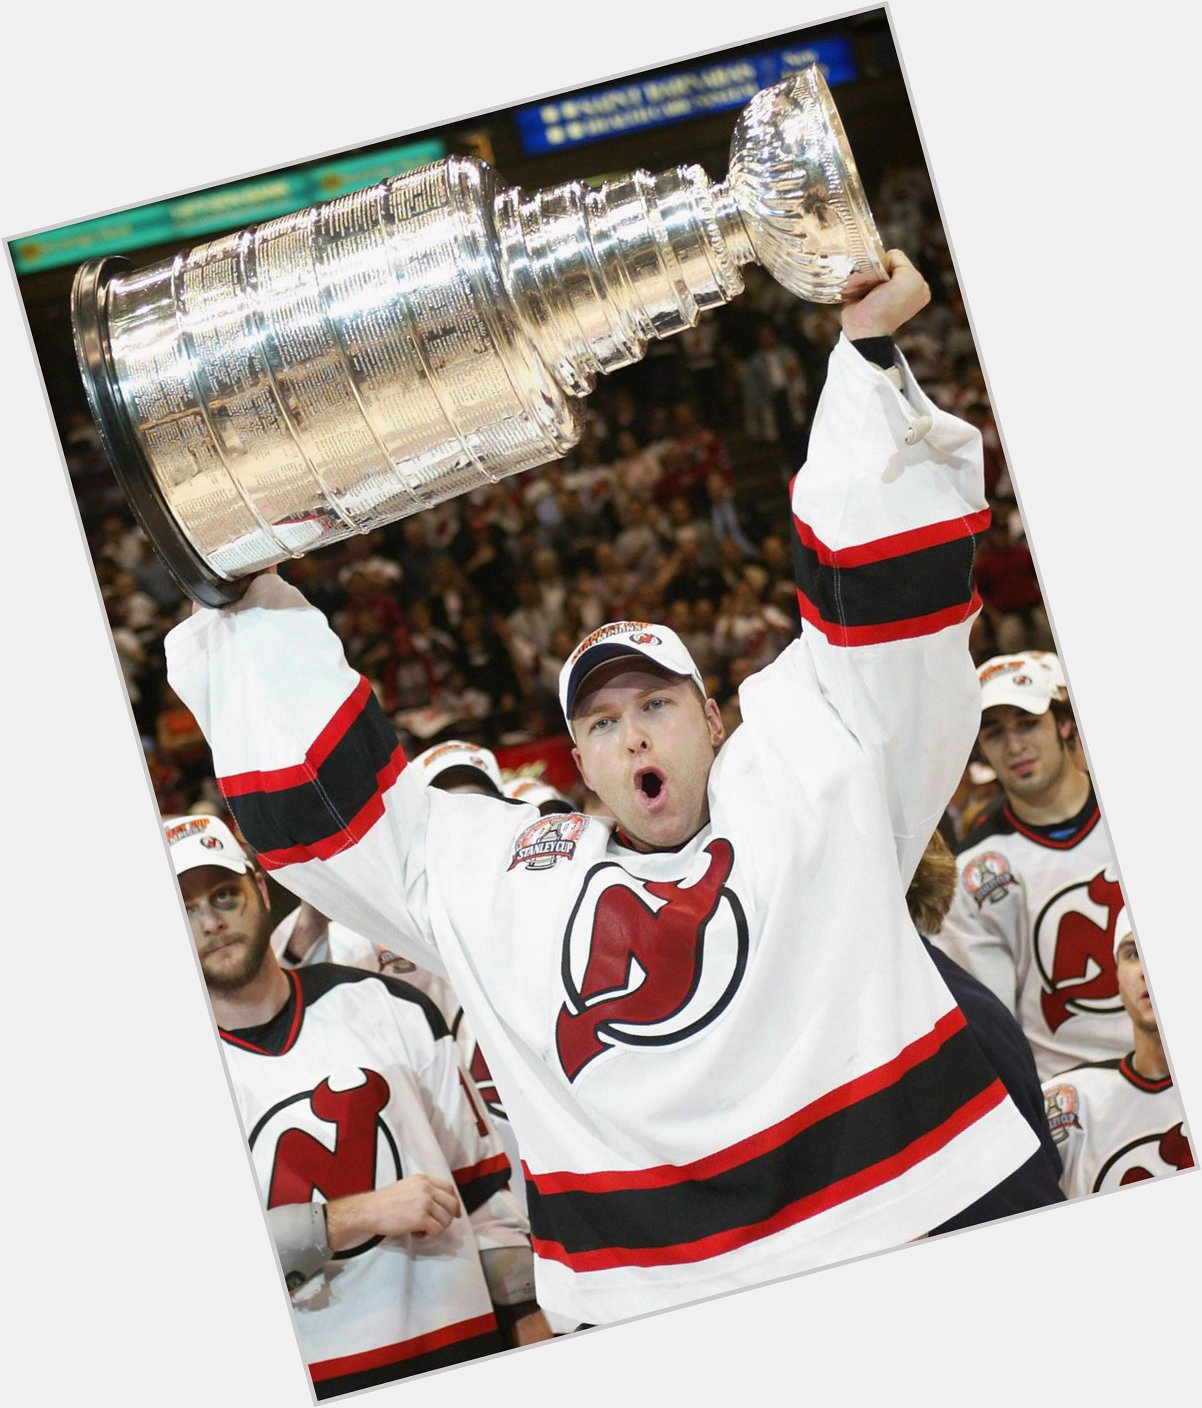 Wishing a happy 43rd birthday to legend Martin Brodeur! 